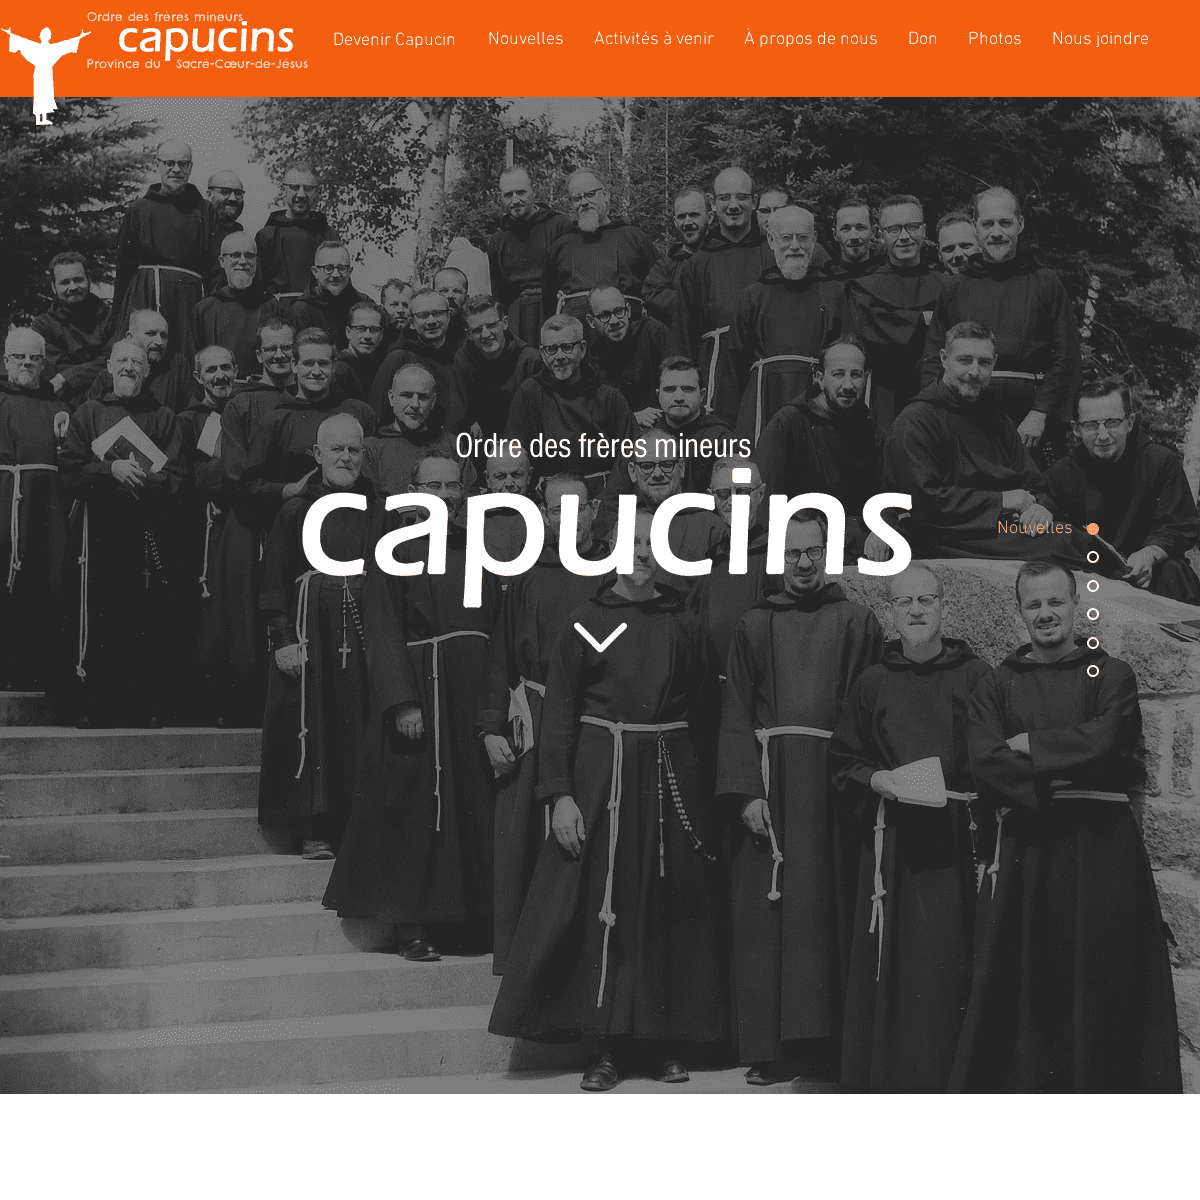 A complete backup of capucin.org